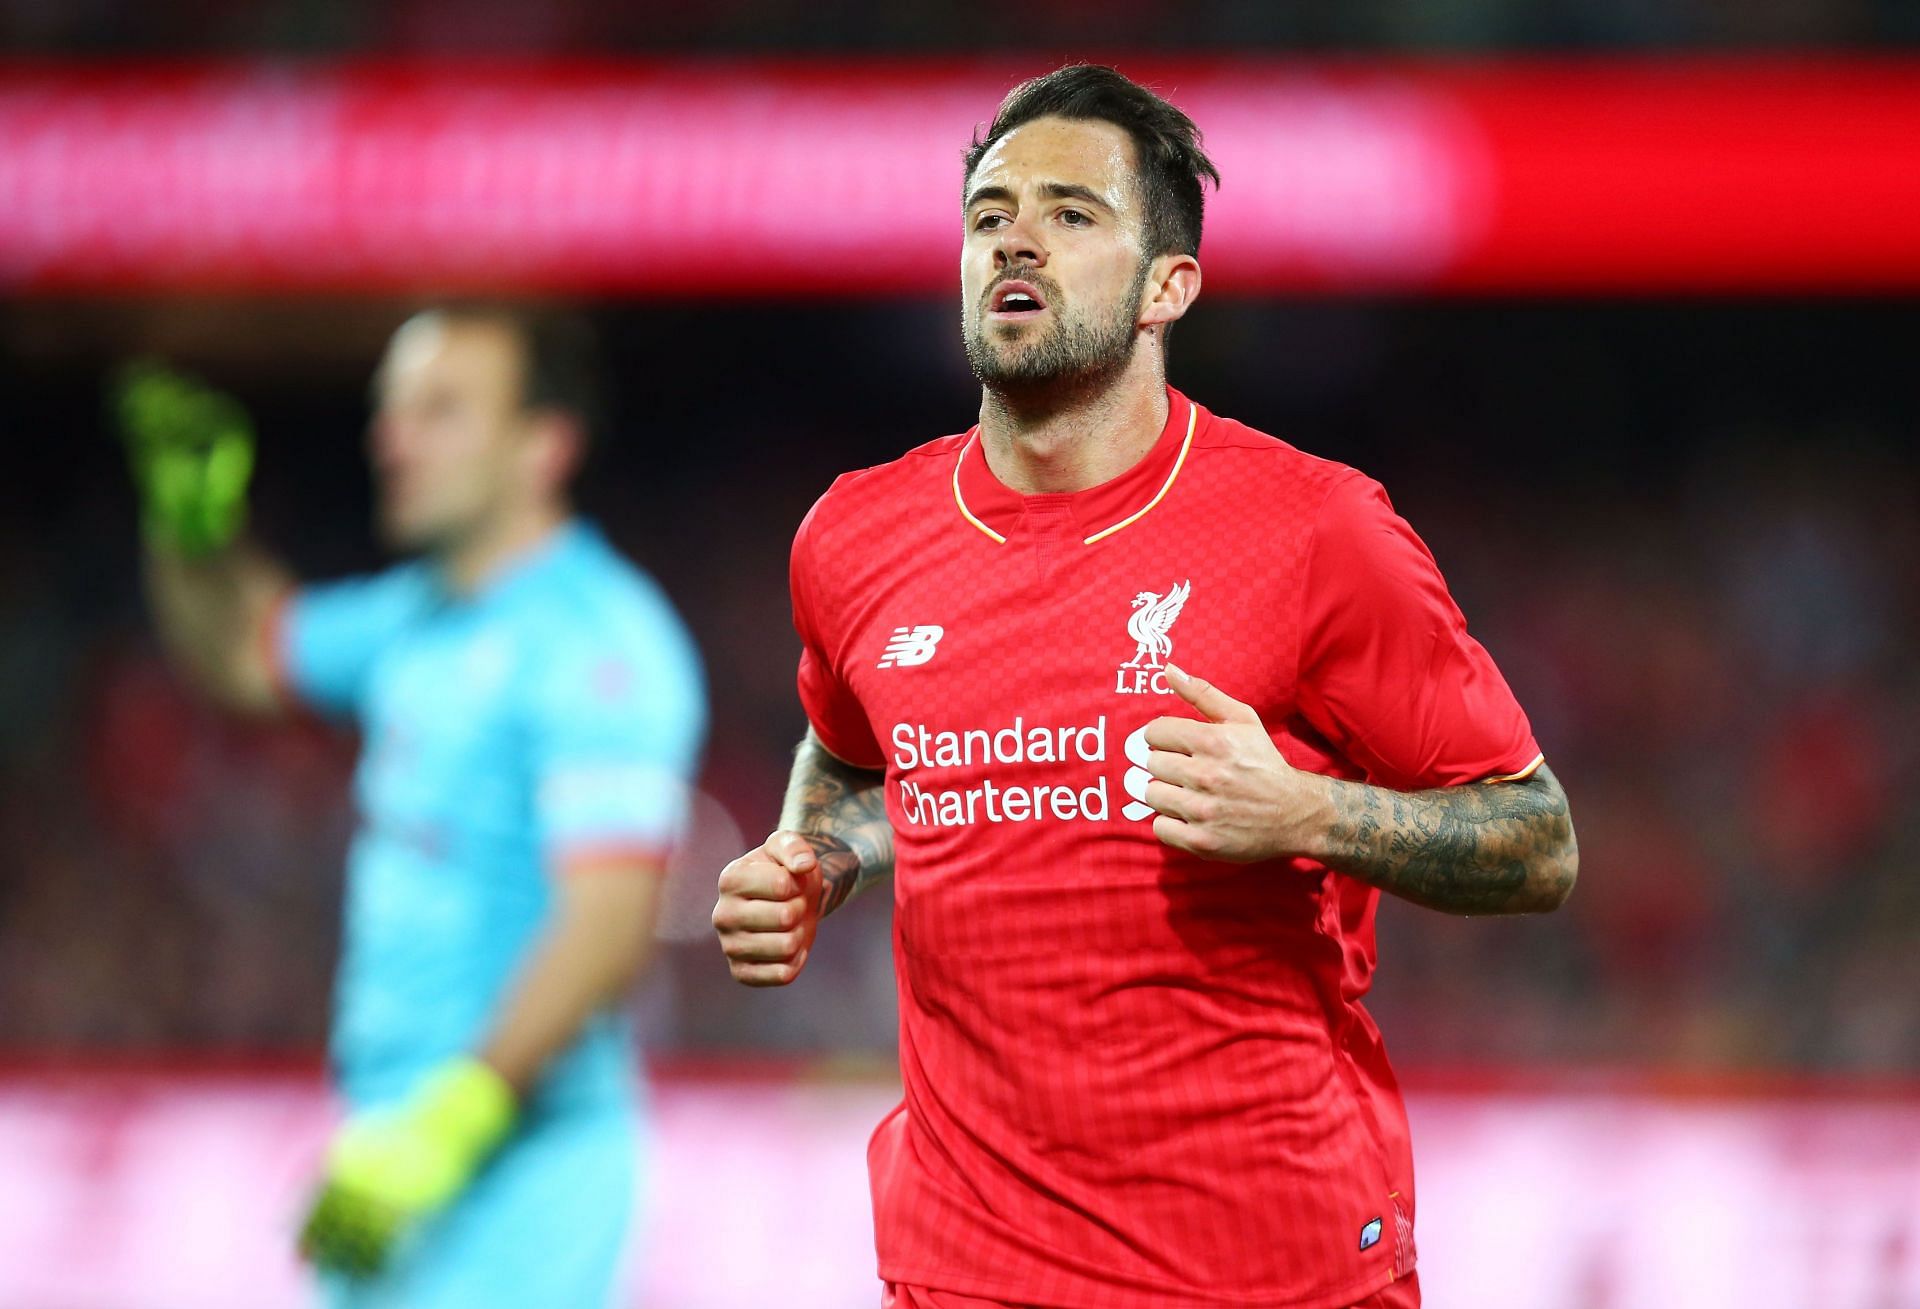 Ings left Liverpool to join Southampton in 2019